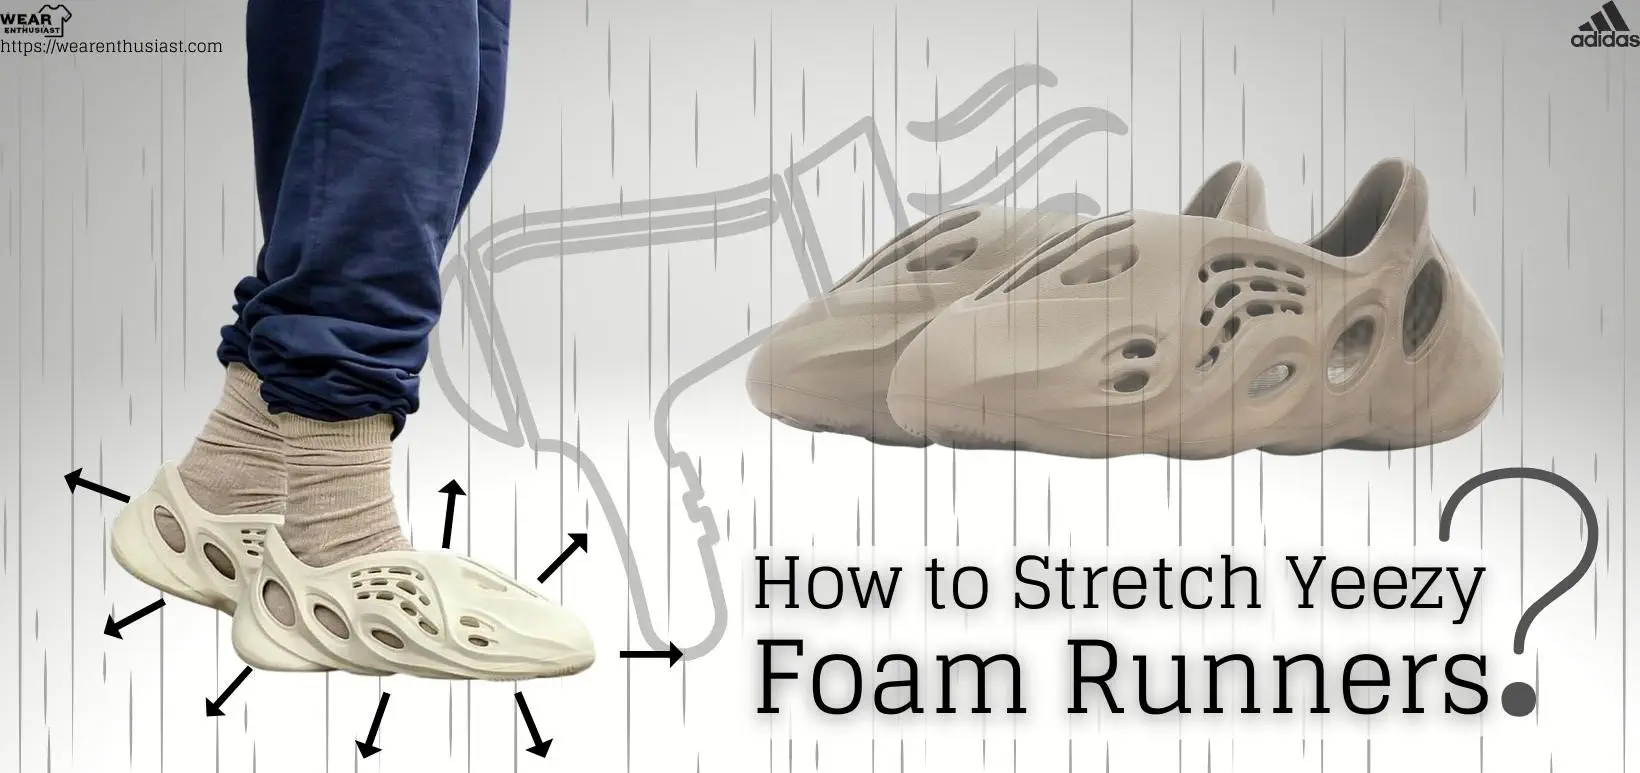 How to stretch Yeezy foam runners?